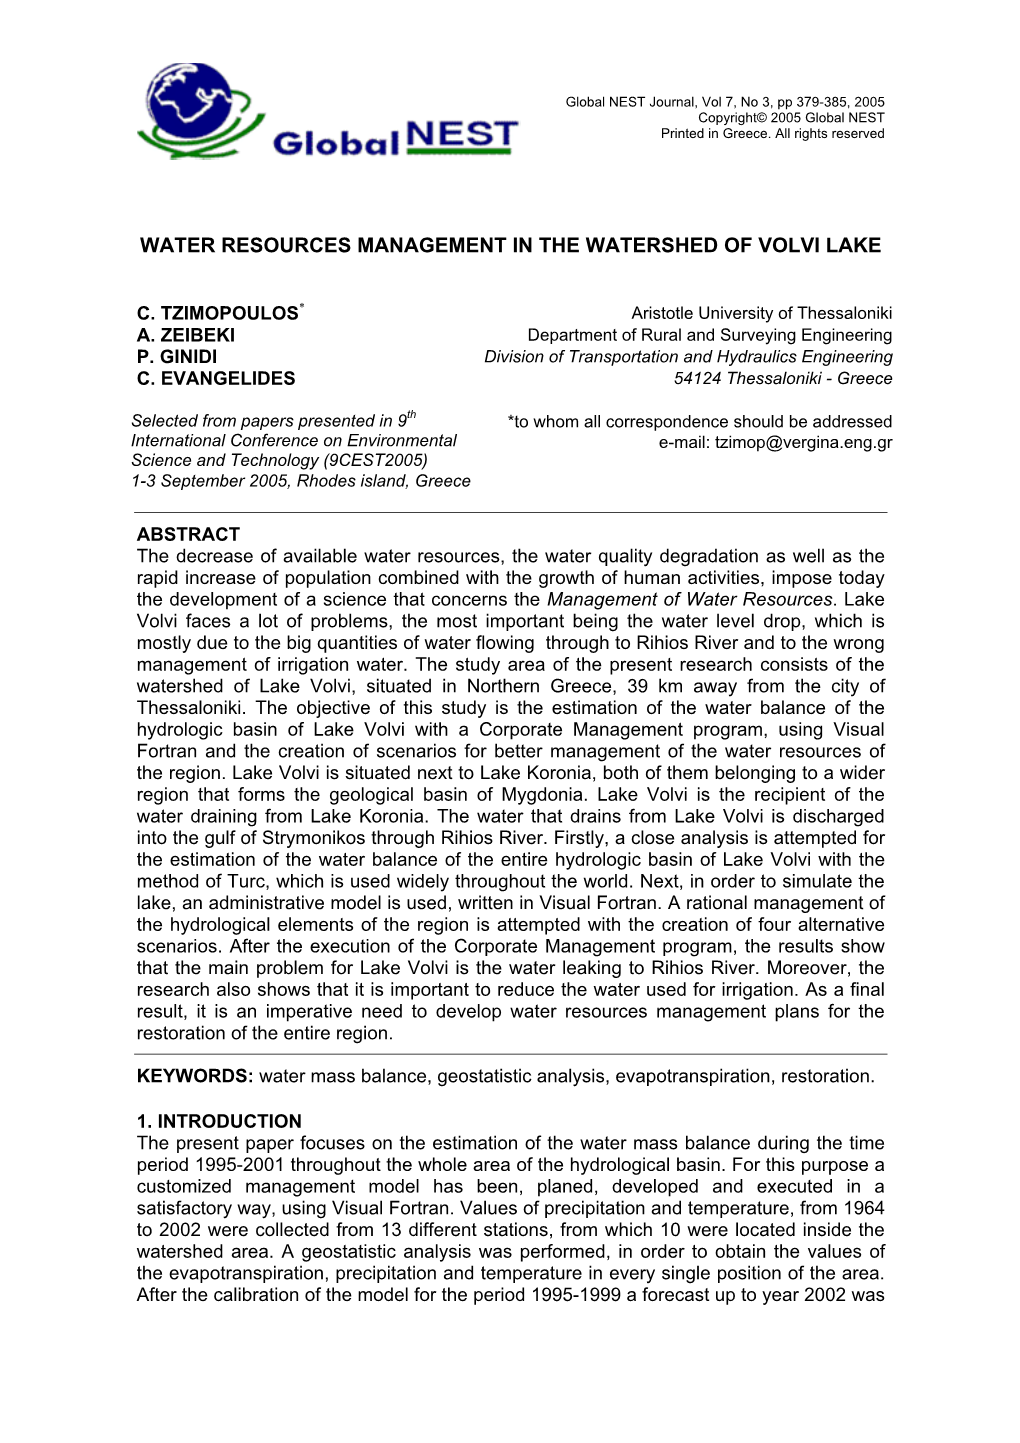 Water Resources Management in the Watershed of Volvi Lake